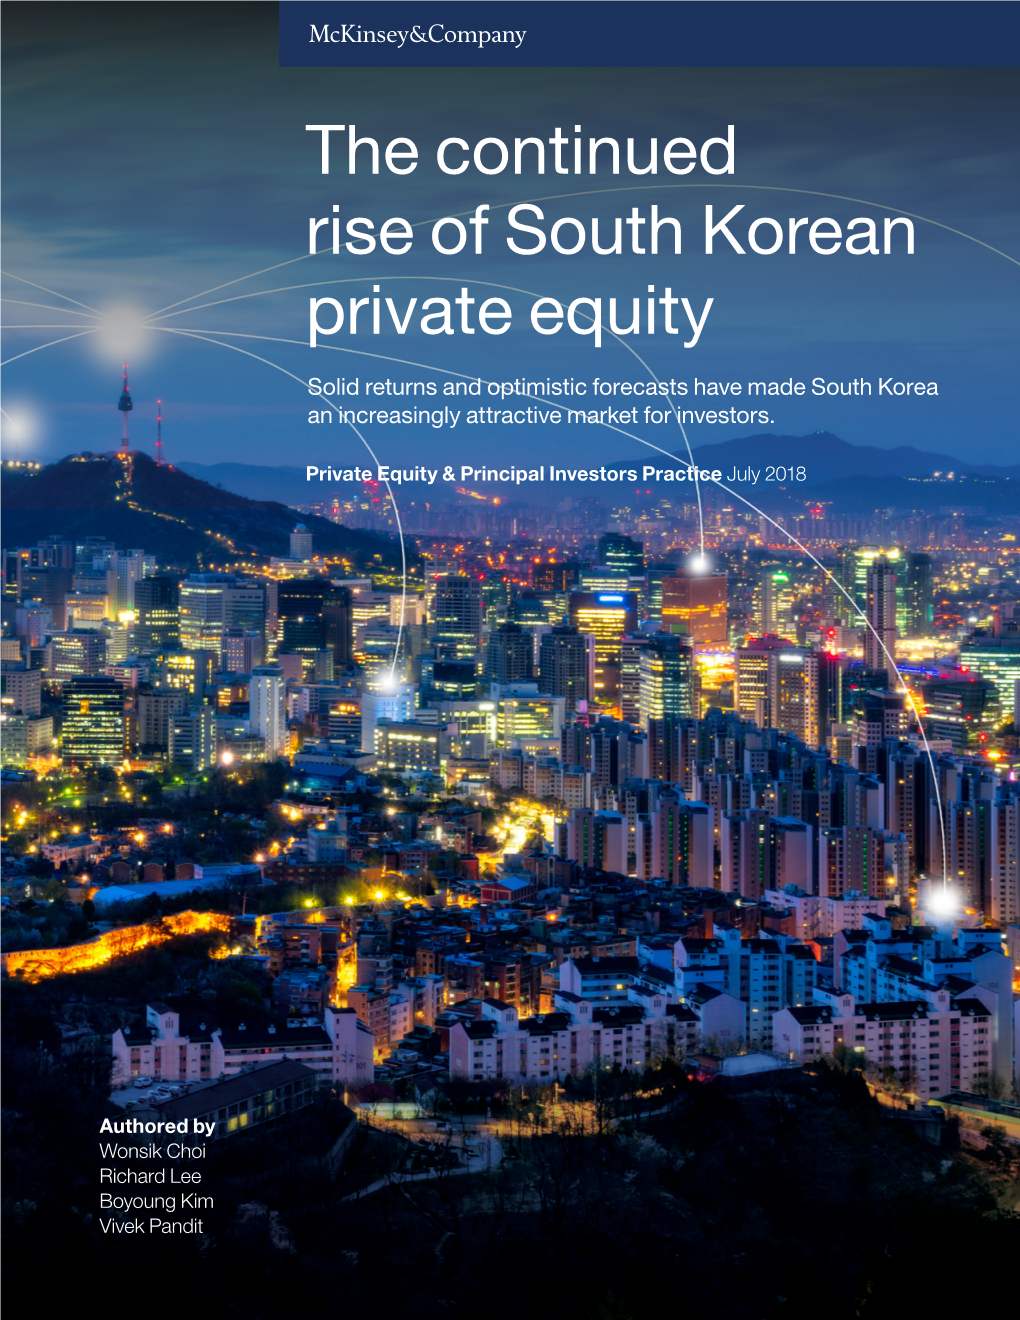 The Continued Rise of South Korean Private Equity